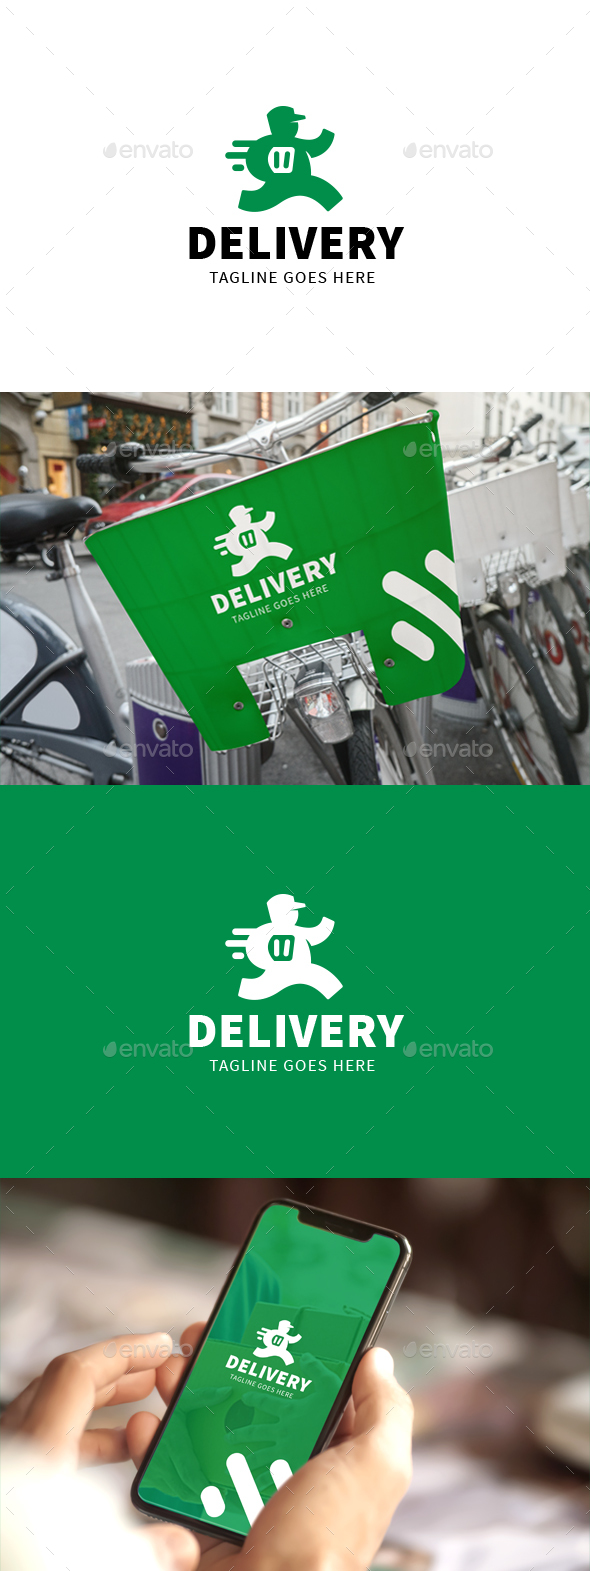 Delivery Services Logo